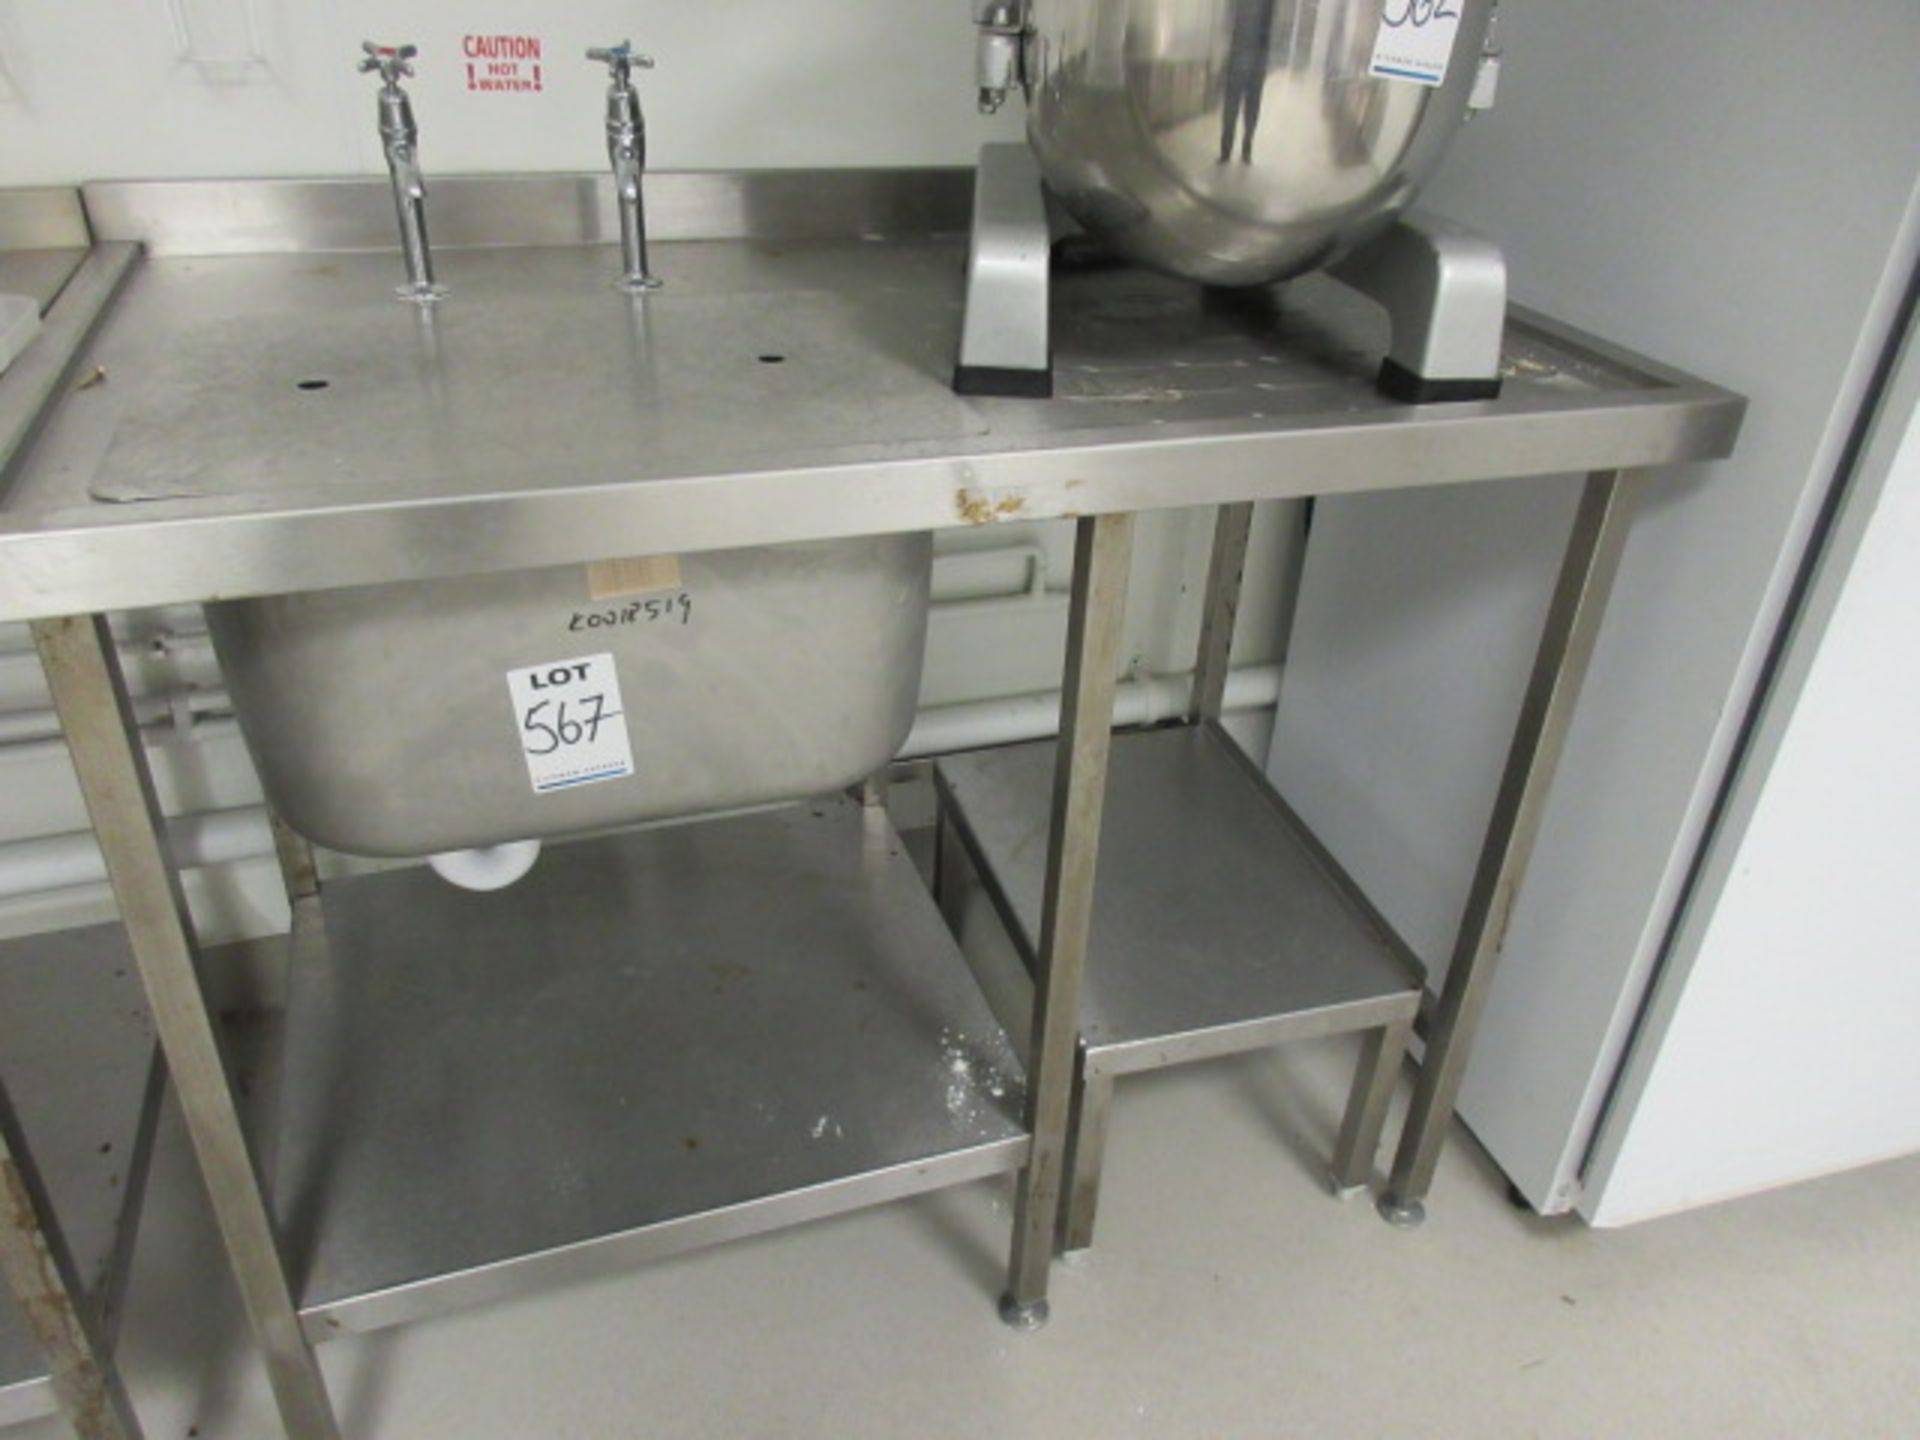 Stainless Steel Sink Unit. Deep sink. Overall size 1200 mm x 700mm x 900 mm Holehouse Road Main